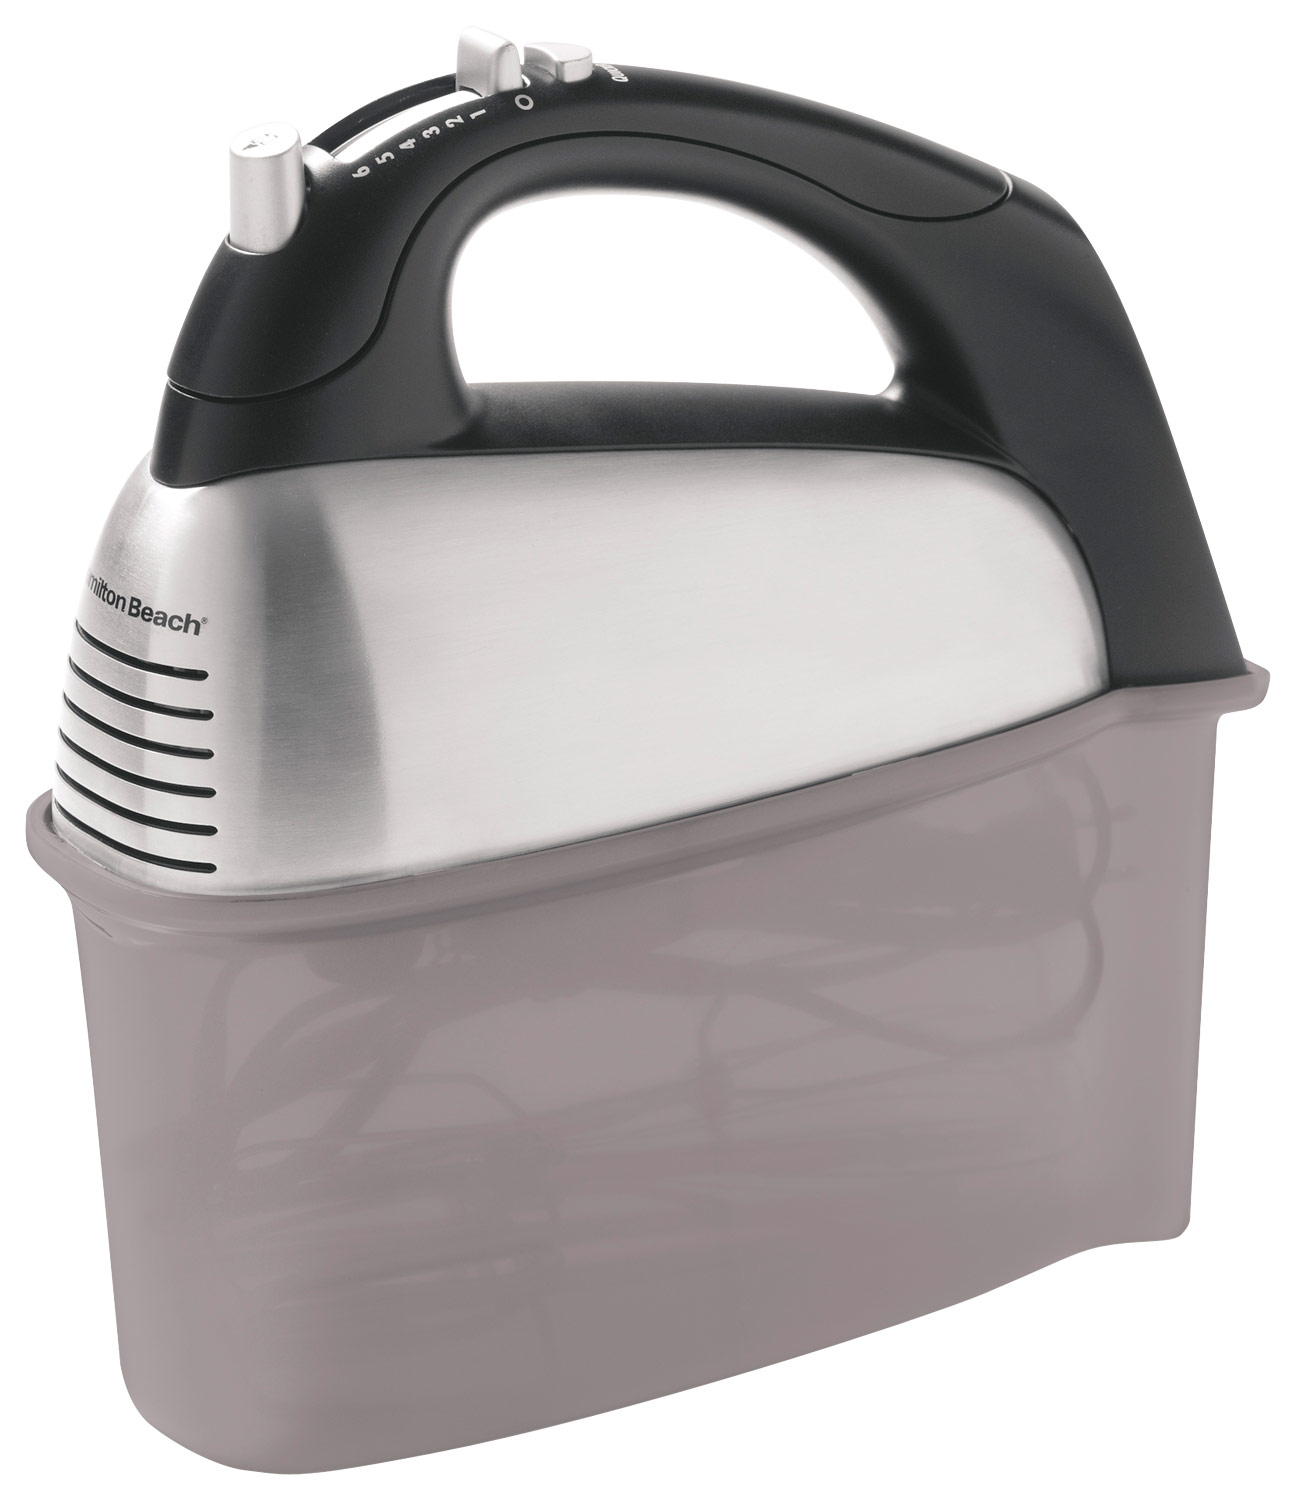 Angle View: Hamilton Beach - 6-Speed Hand Mixer - Brushed Stainless-Steel